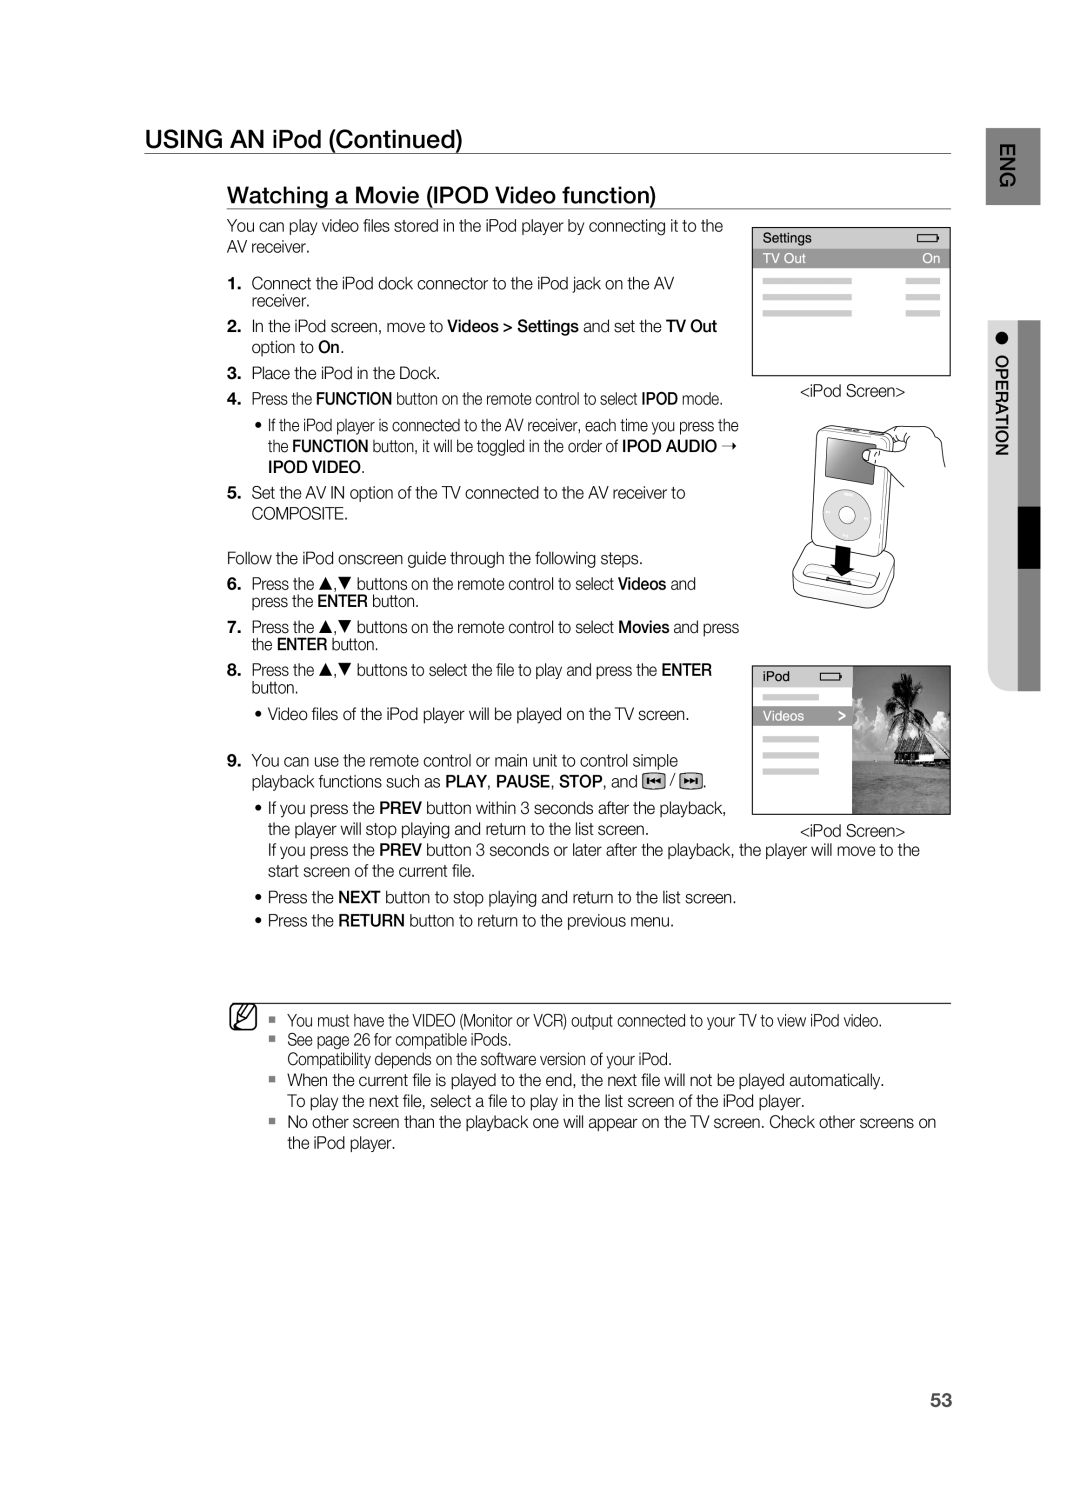 Samsung HT-AS730ST user manual Using AN iPod Continued, Watching a Movie IPOD Video function 